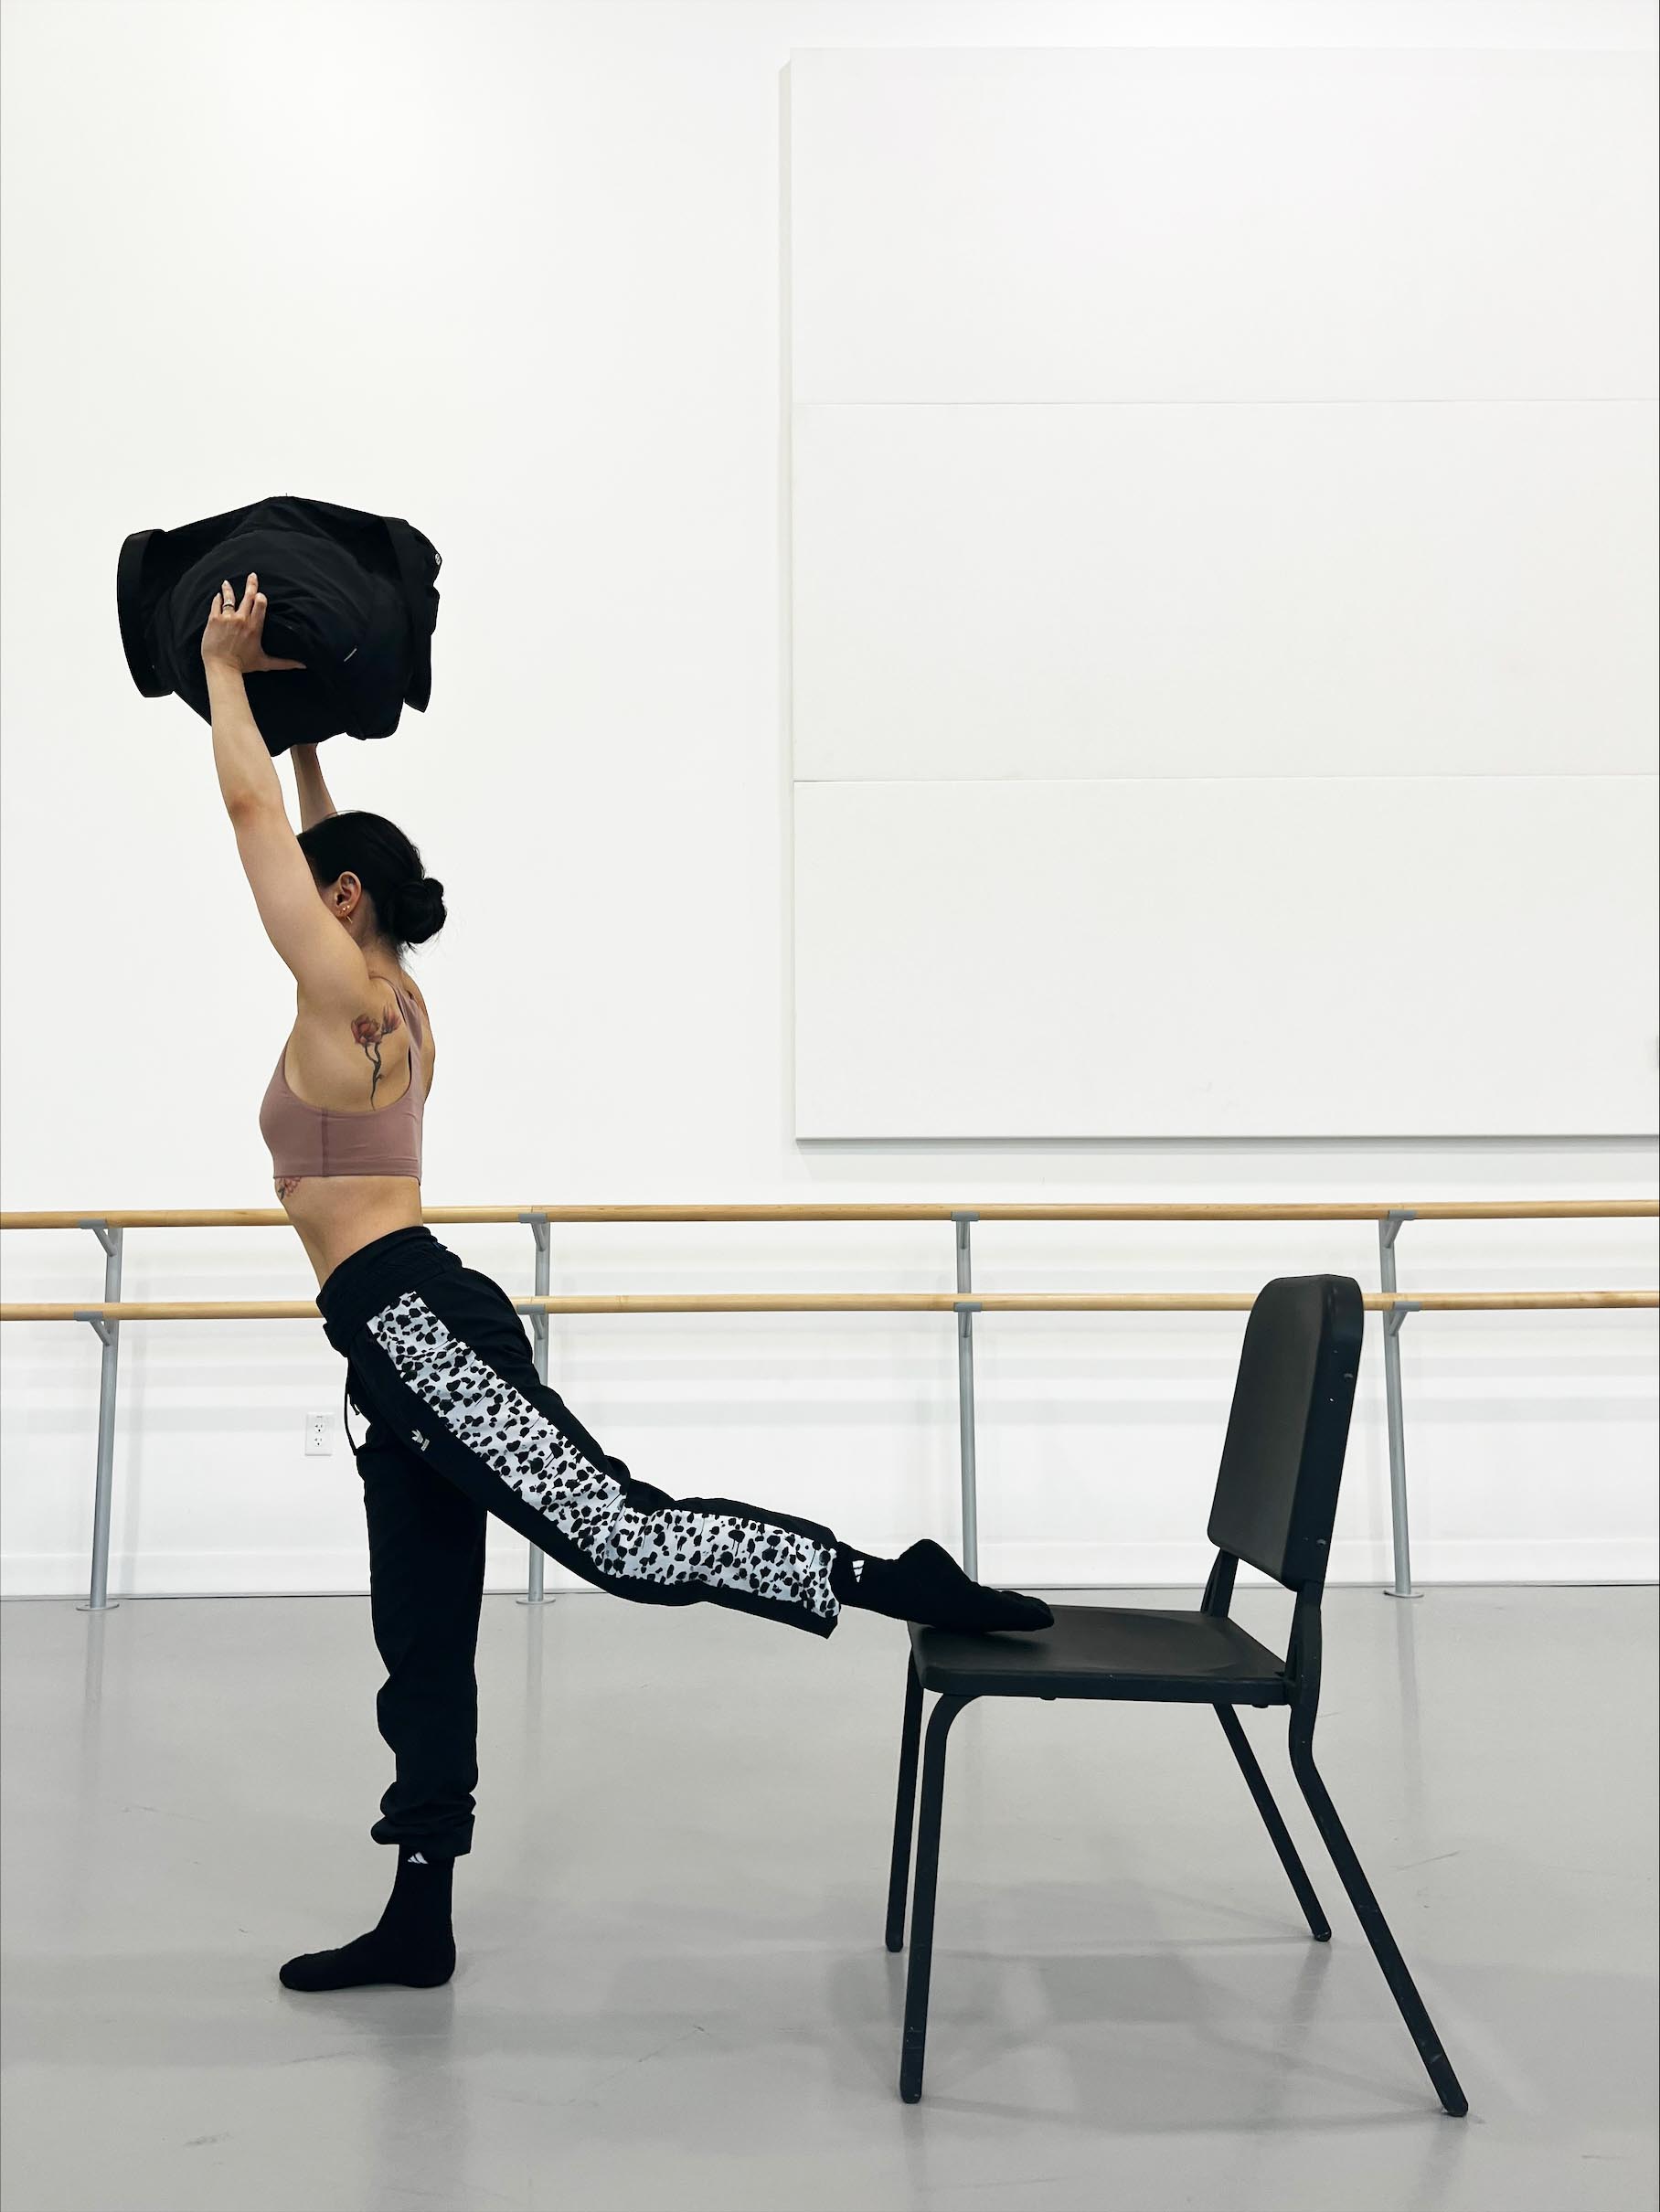 Minori Sakita, wearing a brown sports bra, black workout pants and black socks, stands in front of a black chair and places the top of her left foot on the seat. Her left leg is slightly bent behind her. She holds up a black bag above her head.